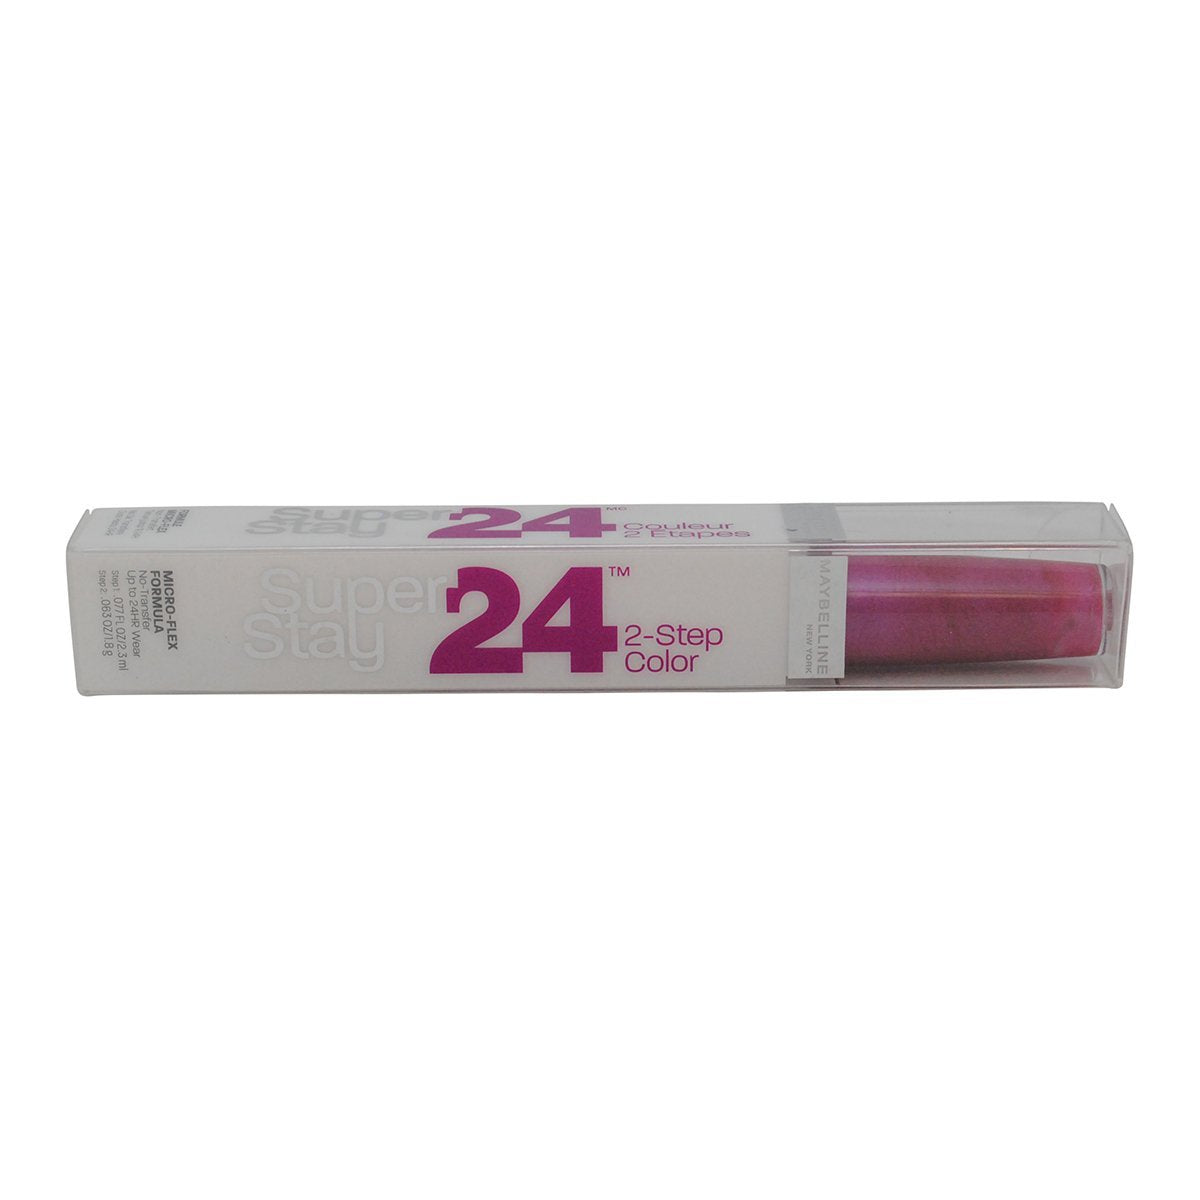 MAYBELLINE New York Superstay 24, 2-step Lipcolor, Very Violet 125 - ADDROS.COM